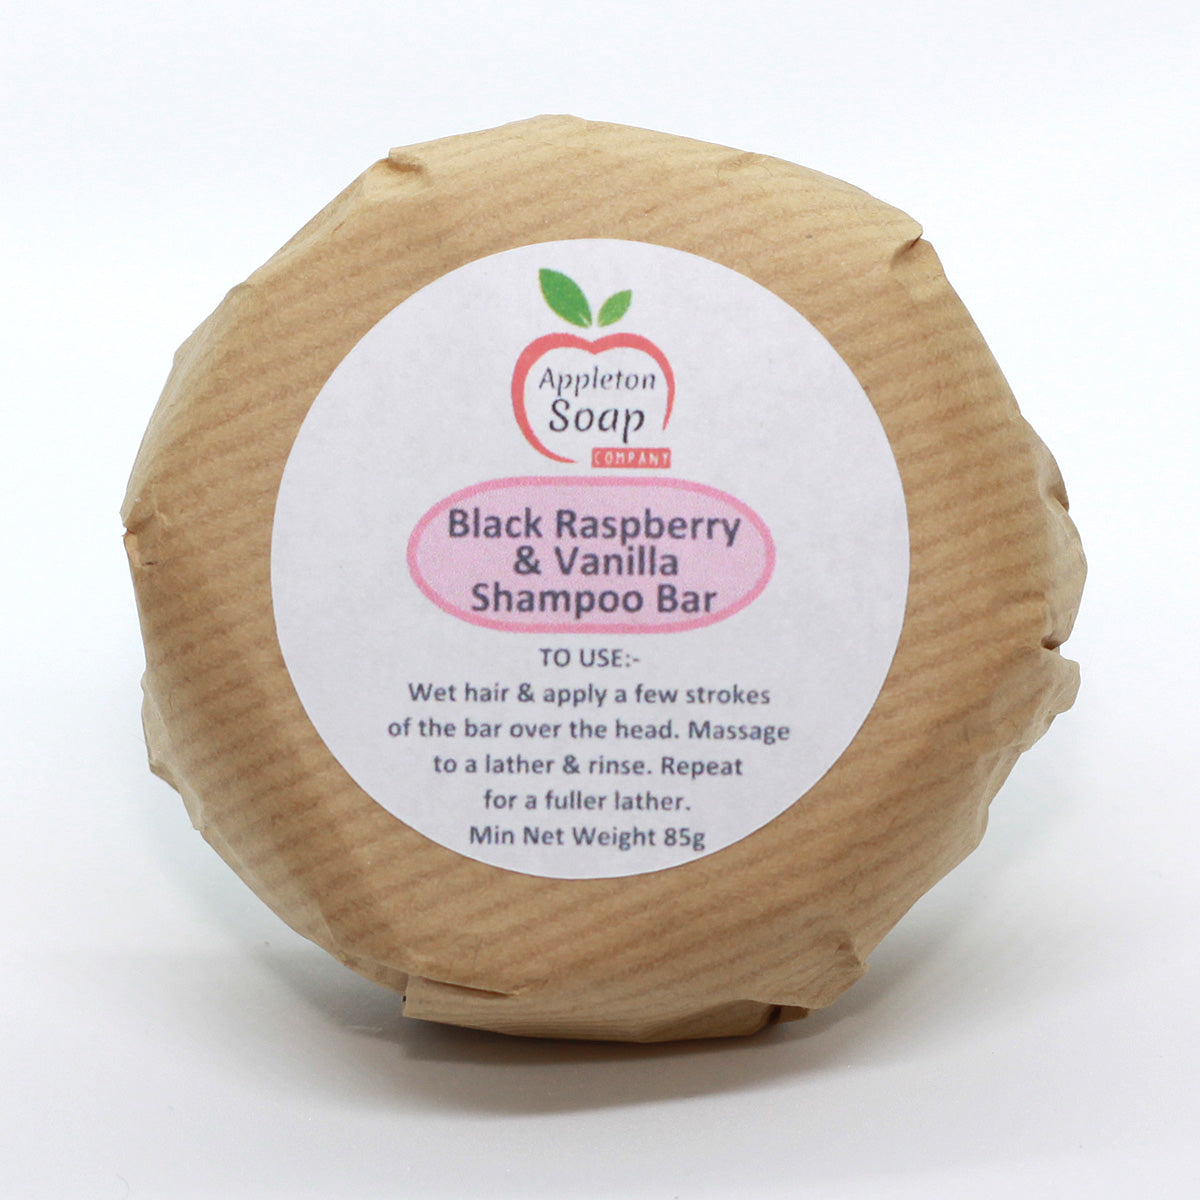 Black raspberry and vanilla shampoo bar wrapped in brown paper with white label